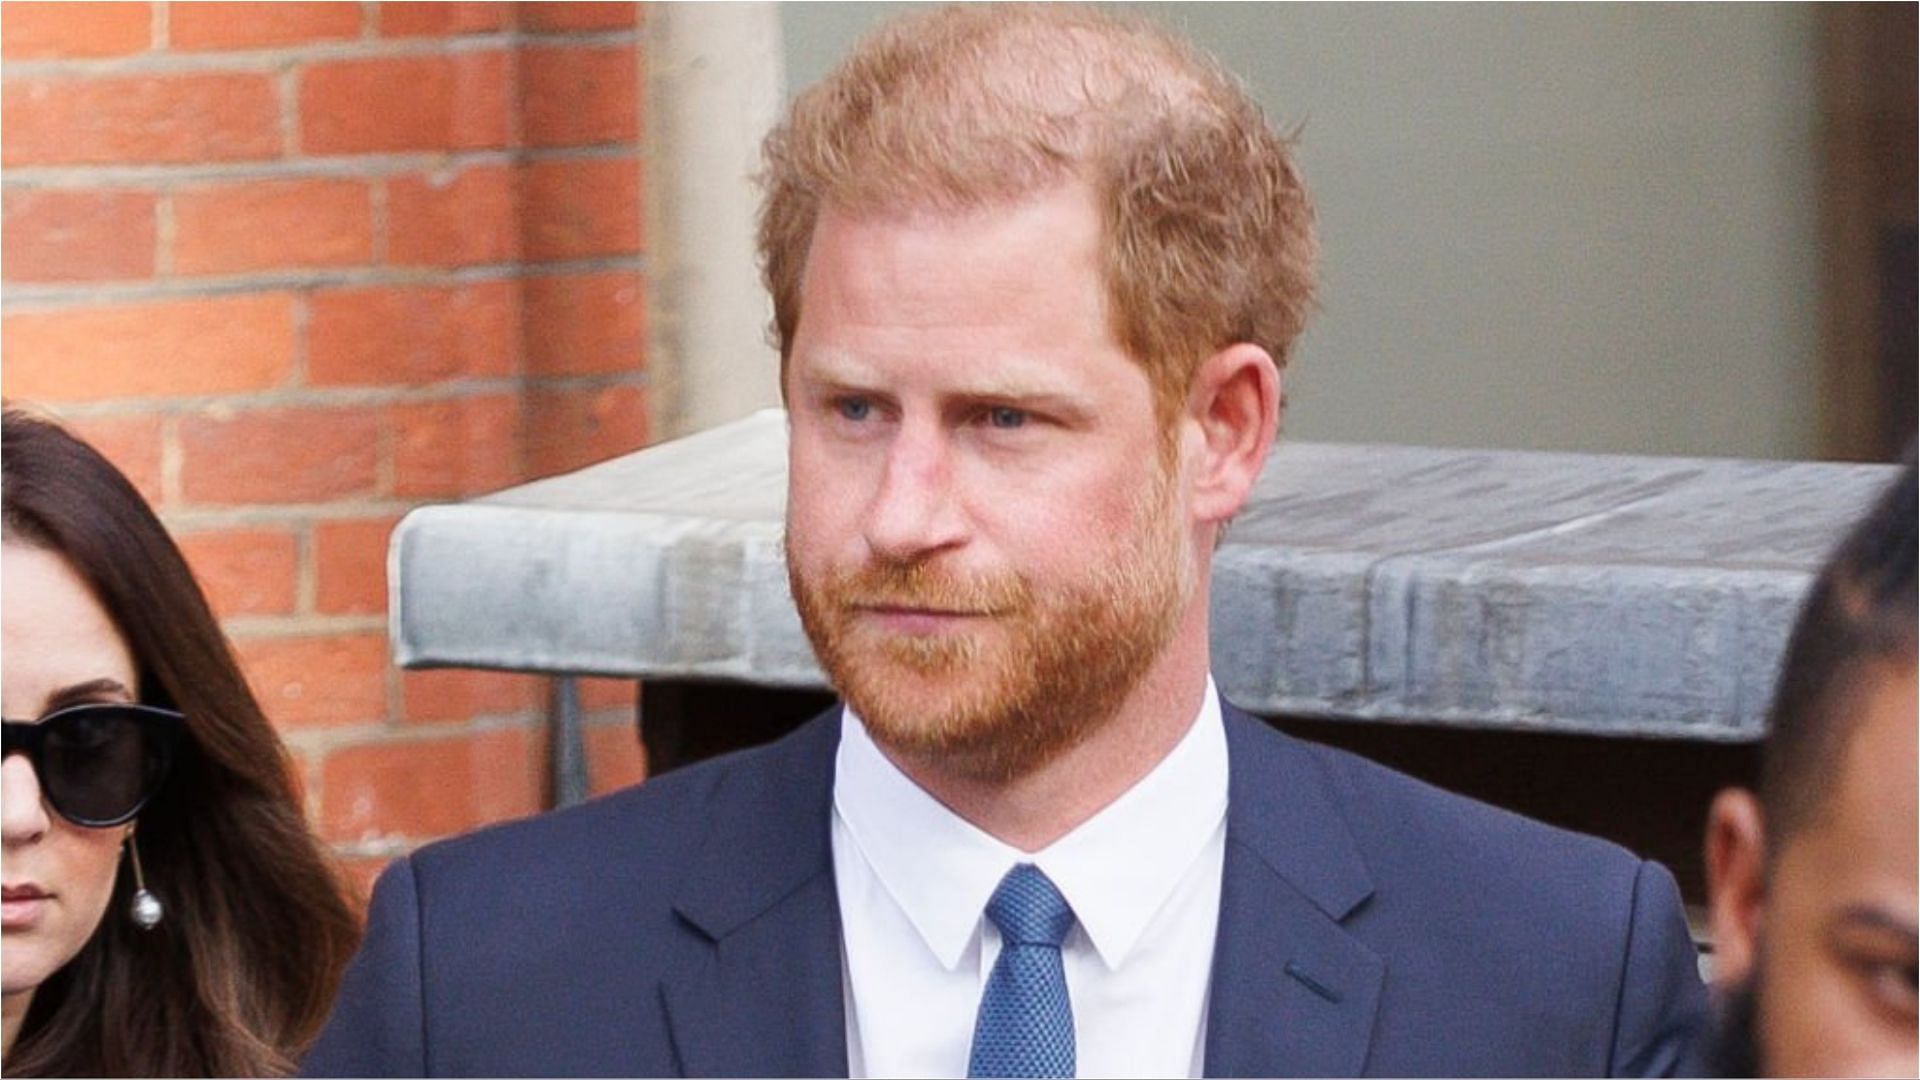 Prince Harry leaves the Royal Courts of Justice (Image via Belinda Jiao/Getty Images)